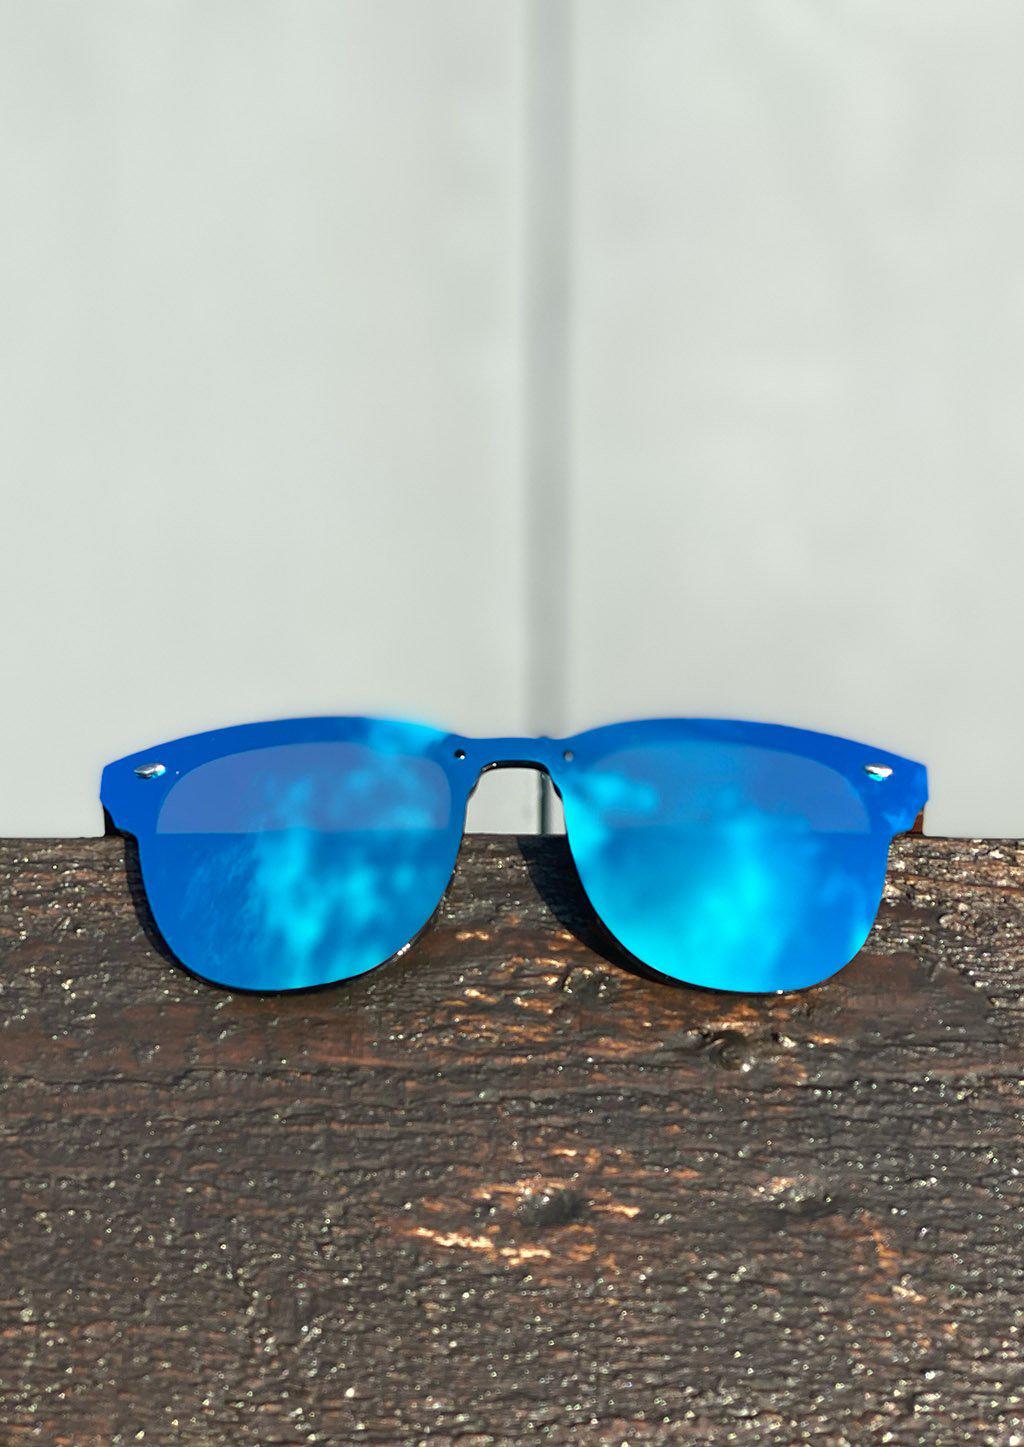 Eyewood tomorrow is our modern cool take on classic models. This is Delphinus with blue mirror lenses. With walnut wooden sides. Photo taken outside showing the cool blue colors.